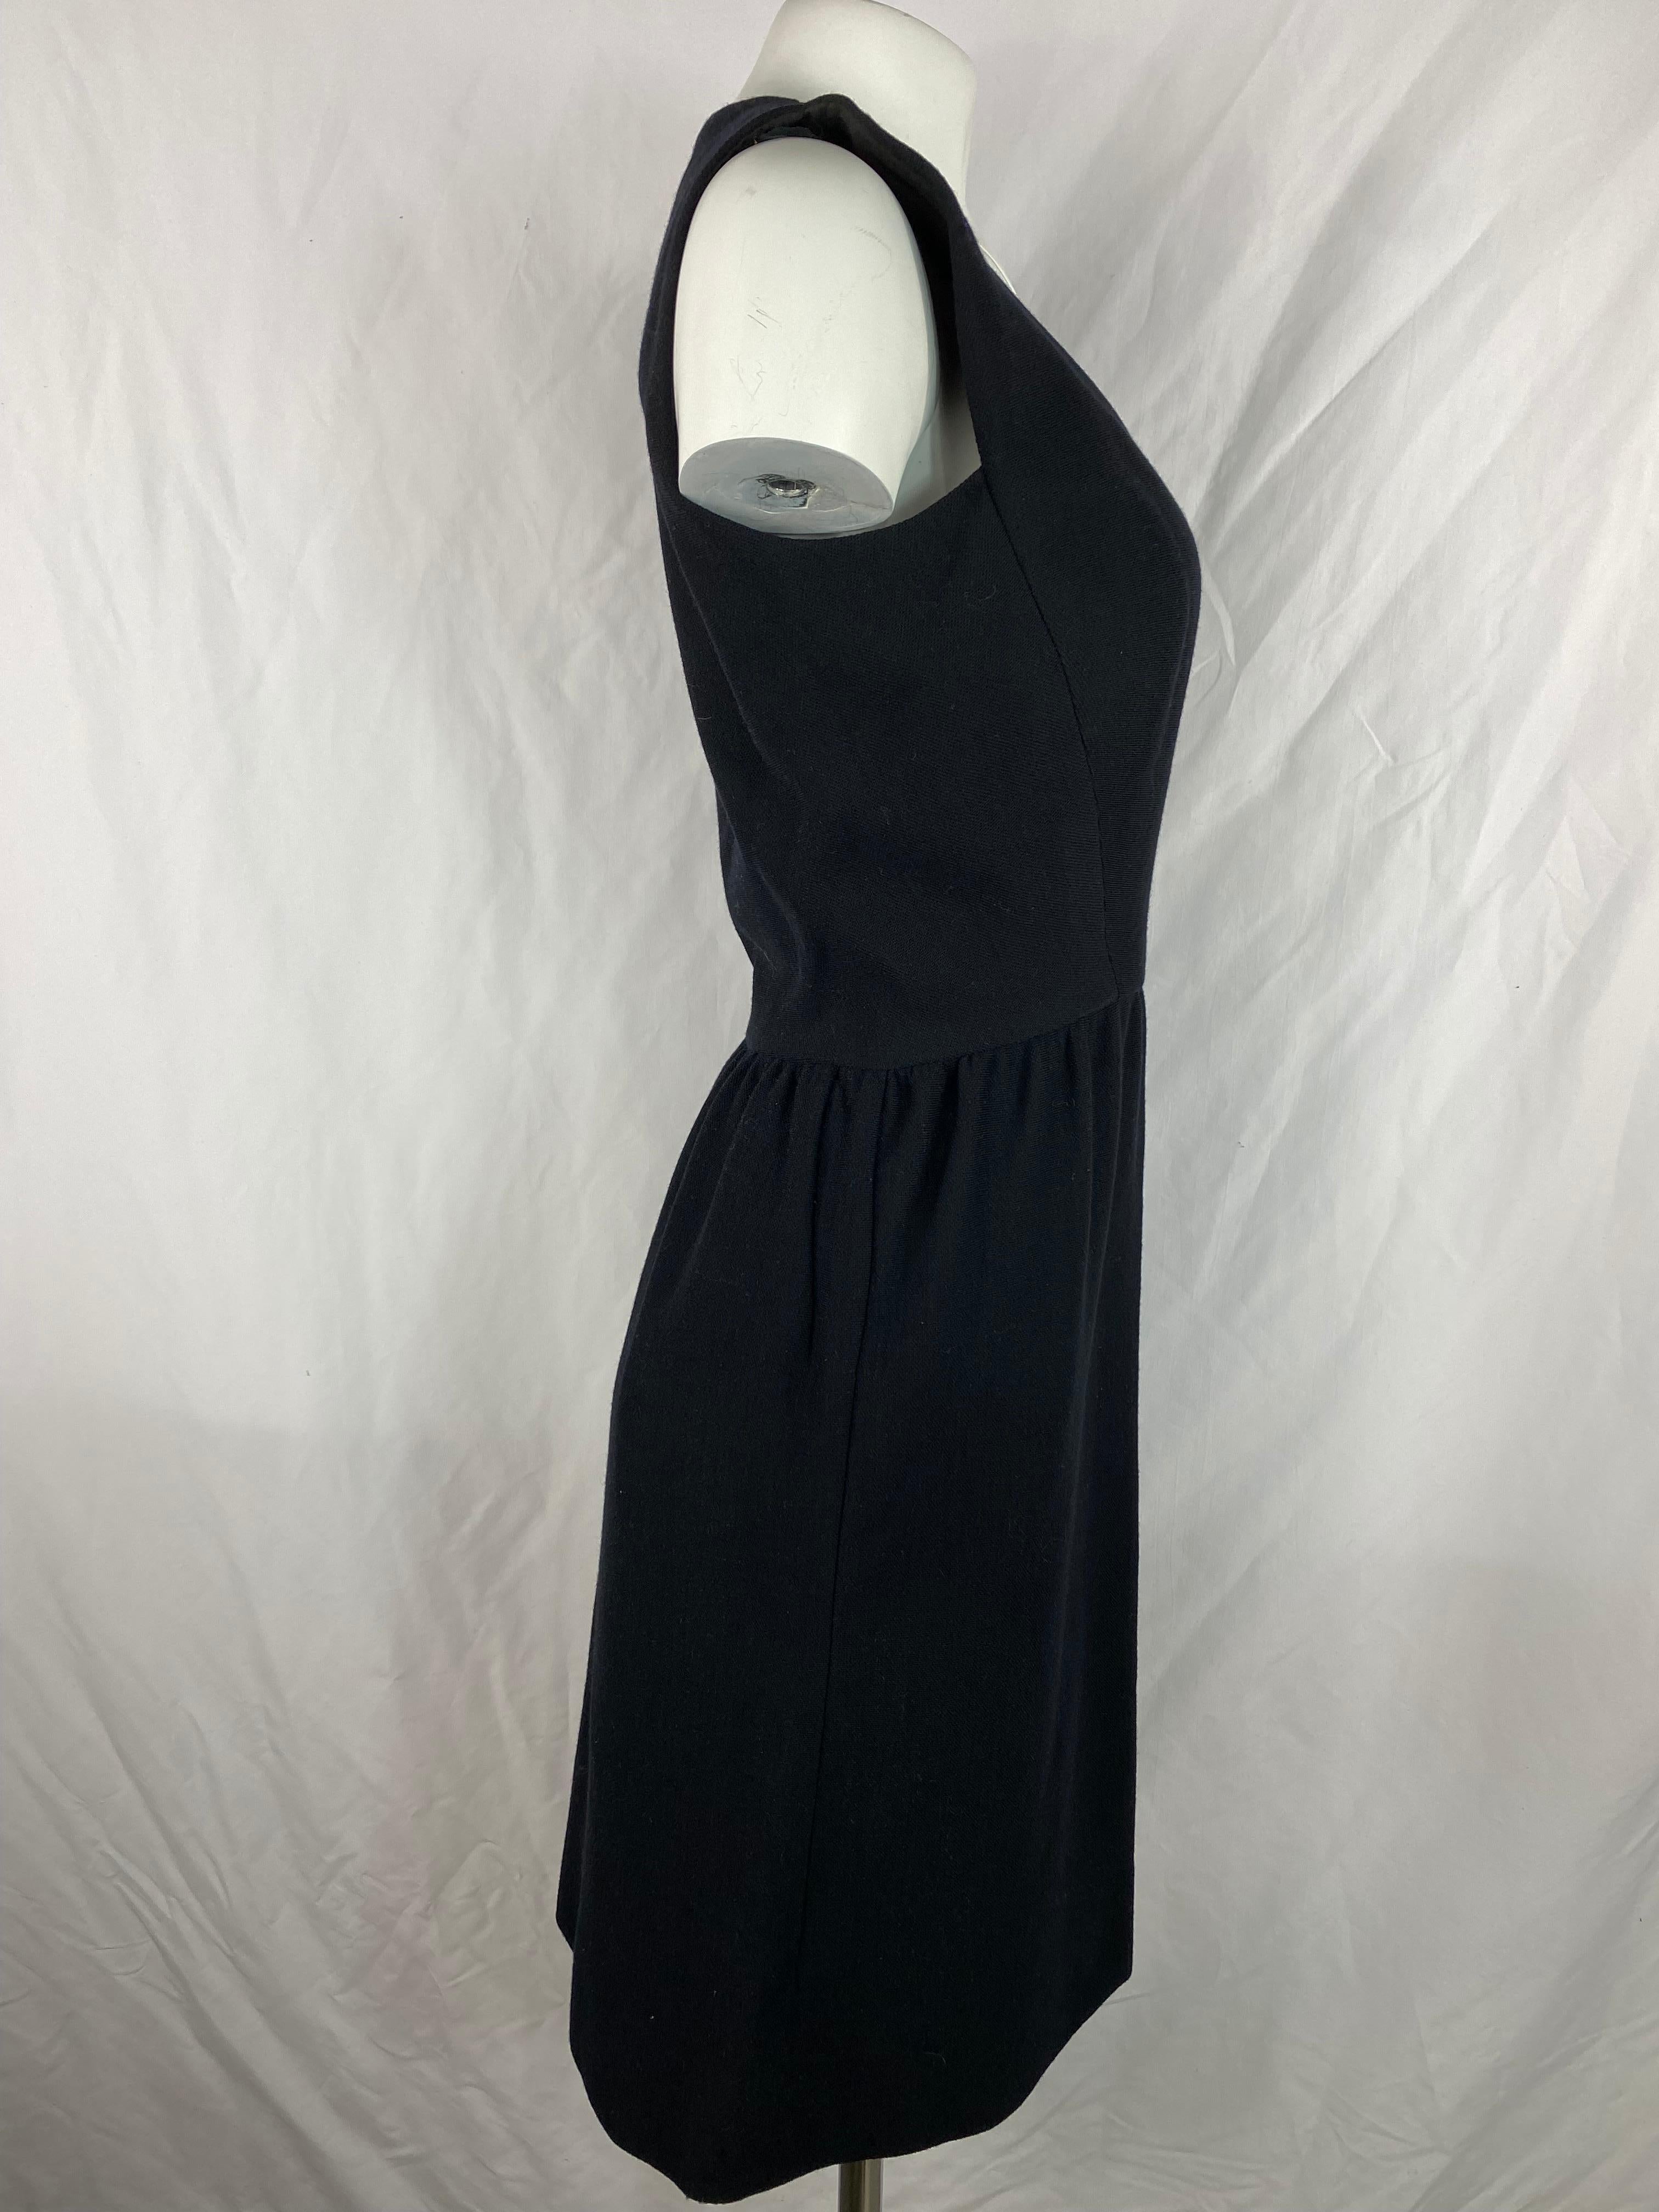 Galanos Black Mini Dress In Excellent Condition For Sale In Beverly Hills, CA